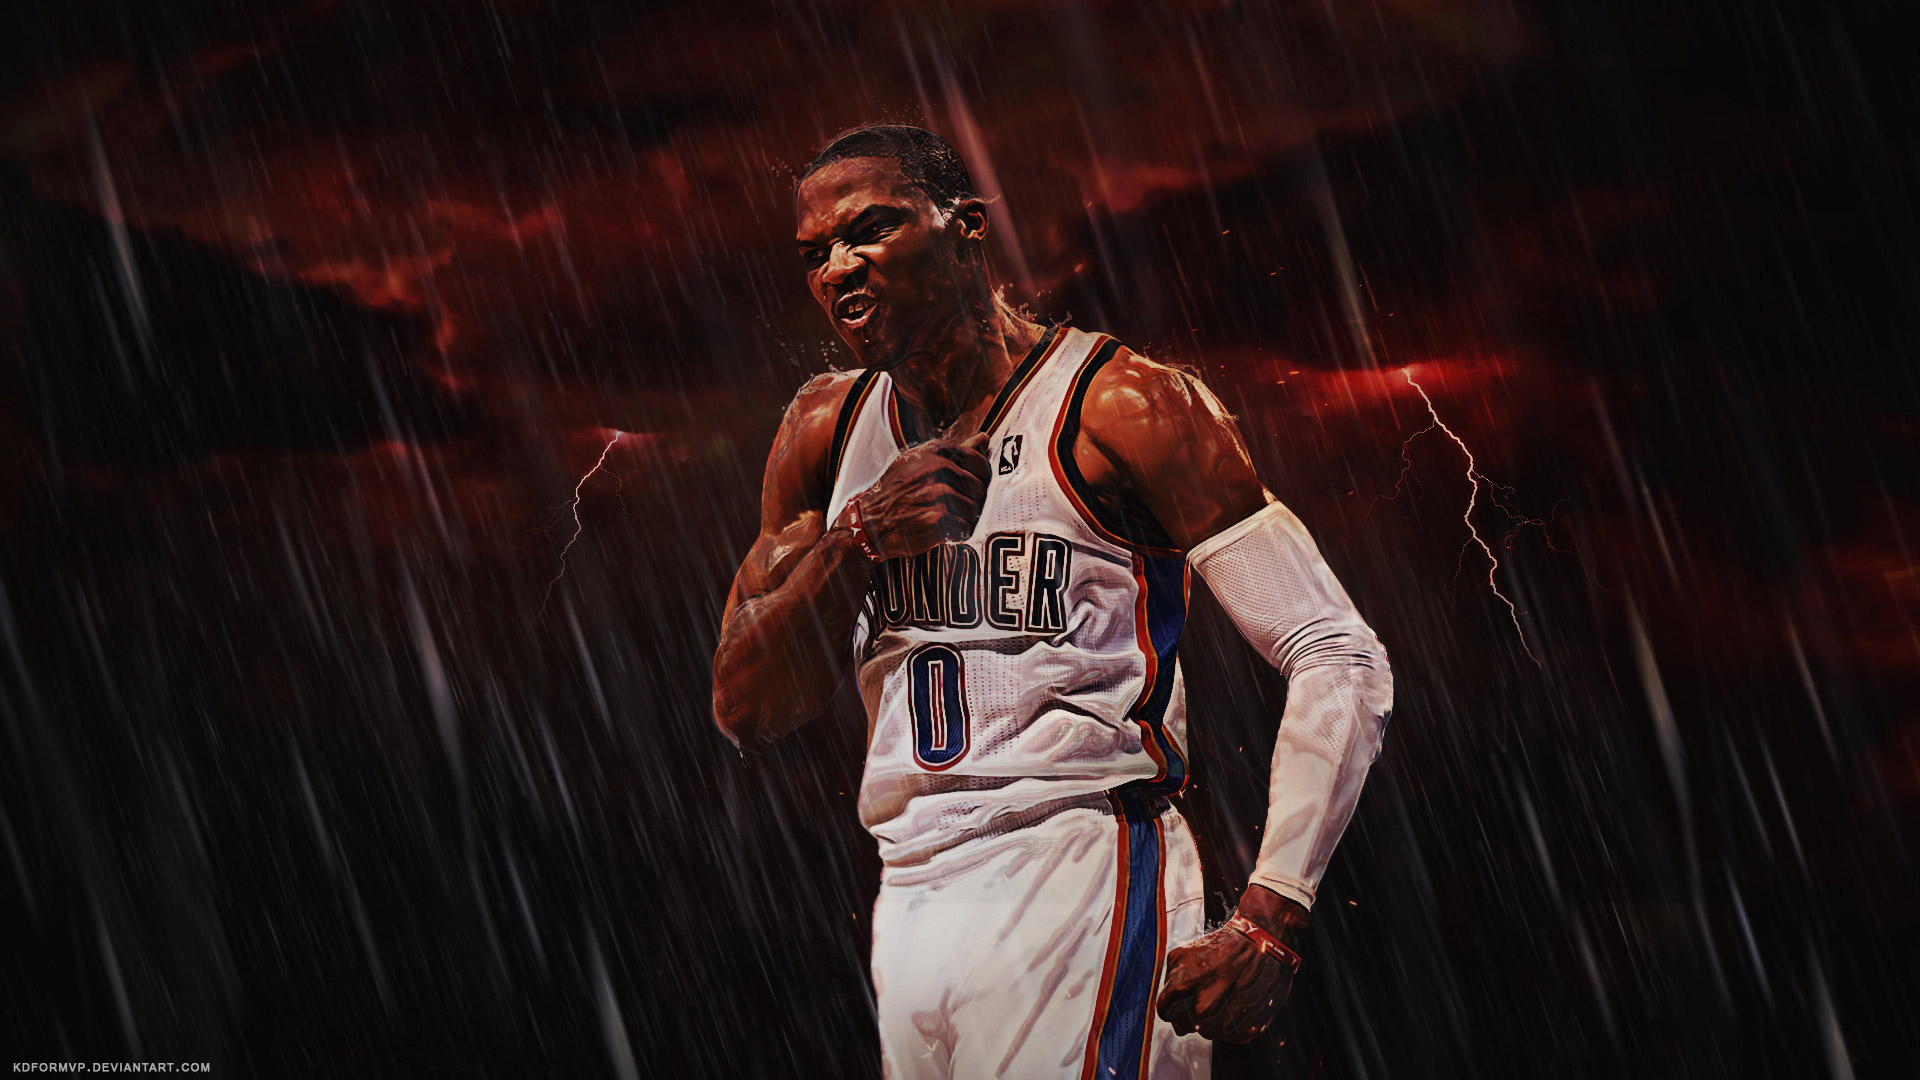 1920x1080 Free download Russell Westbrook Thunder 2015 2016 Wallpaper Basketball Wallpapers [] for your Desktop, Mobile \u0026 Tablet | Explore 50+ Russell Westbrook 2016 Wallpaper | Russell Westbrook Wallpaper 2015, OKC Thunder Wallpaper 2016, Russell ..